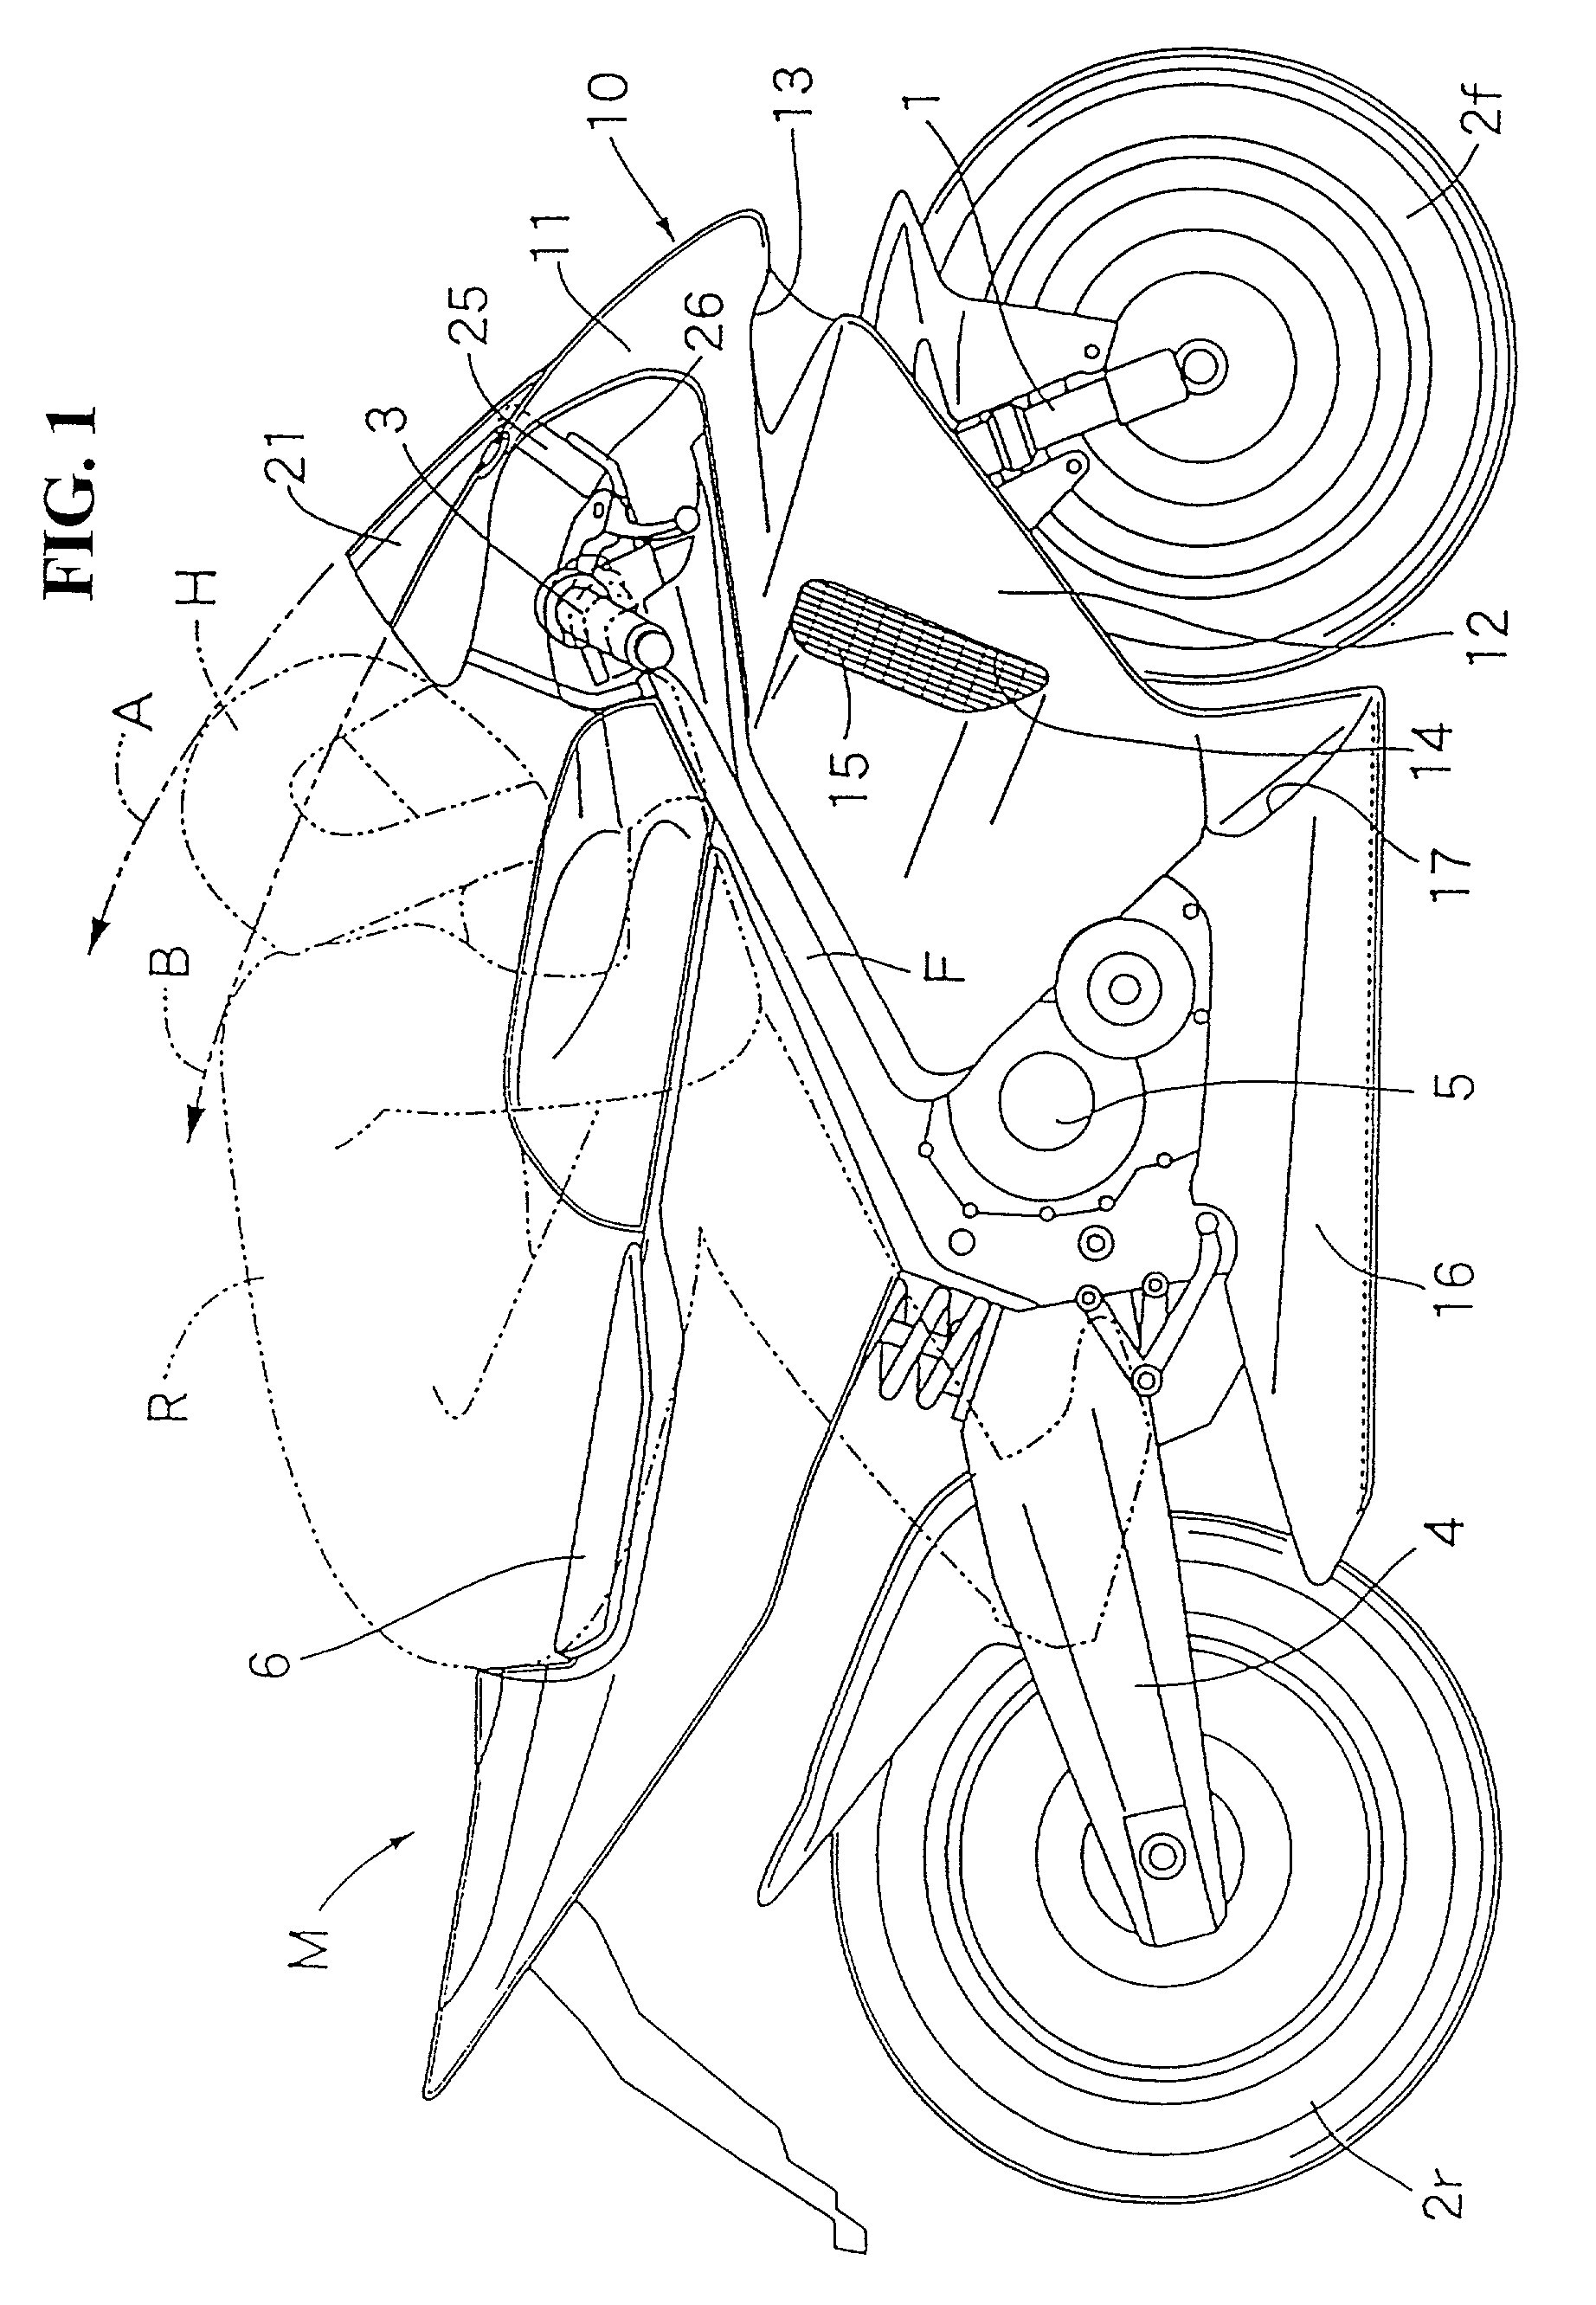 Arrangement structure of upper cowl, screen, and meter for motorcycles